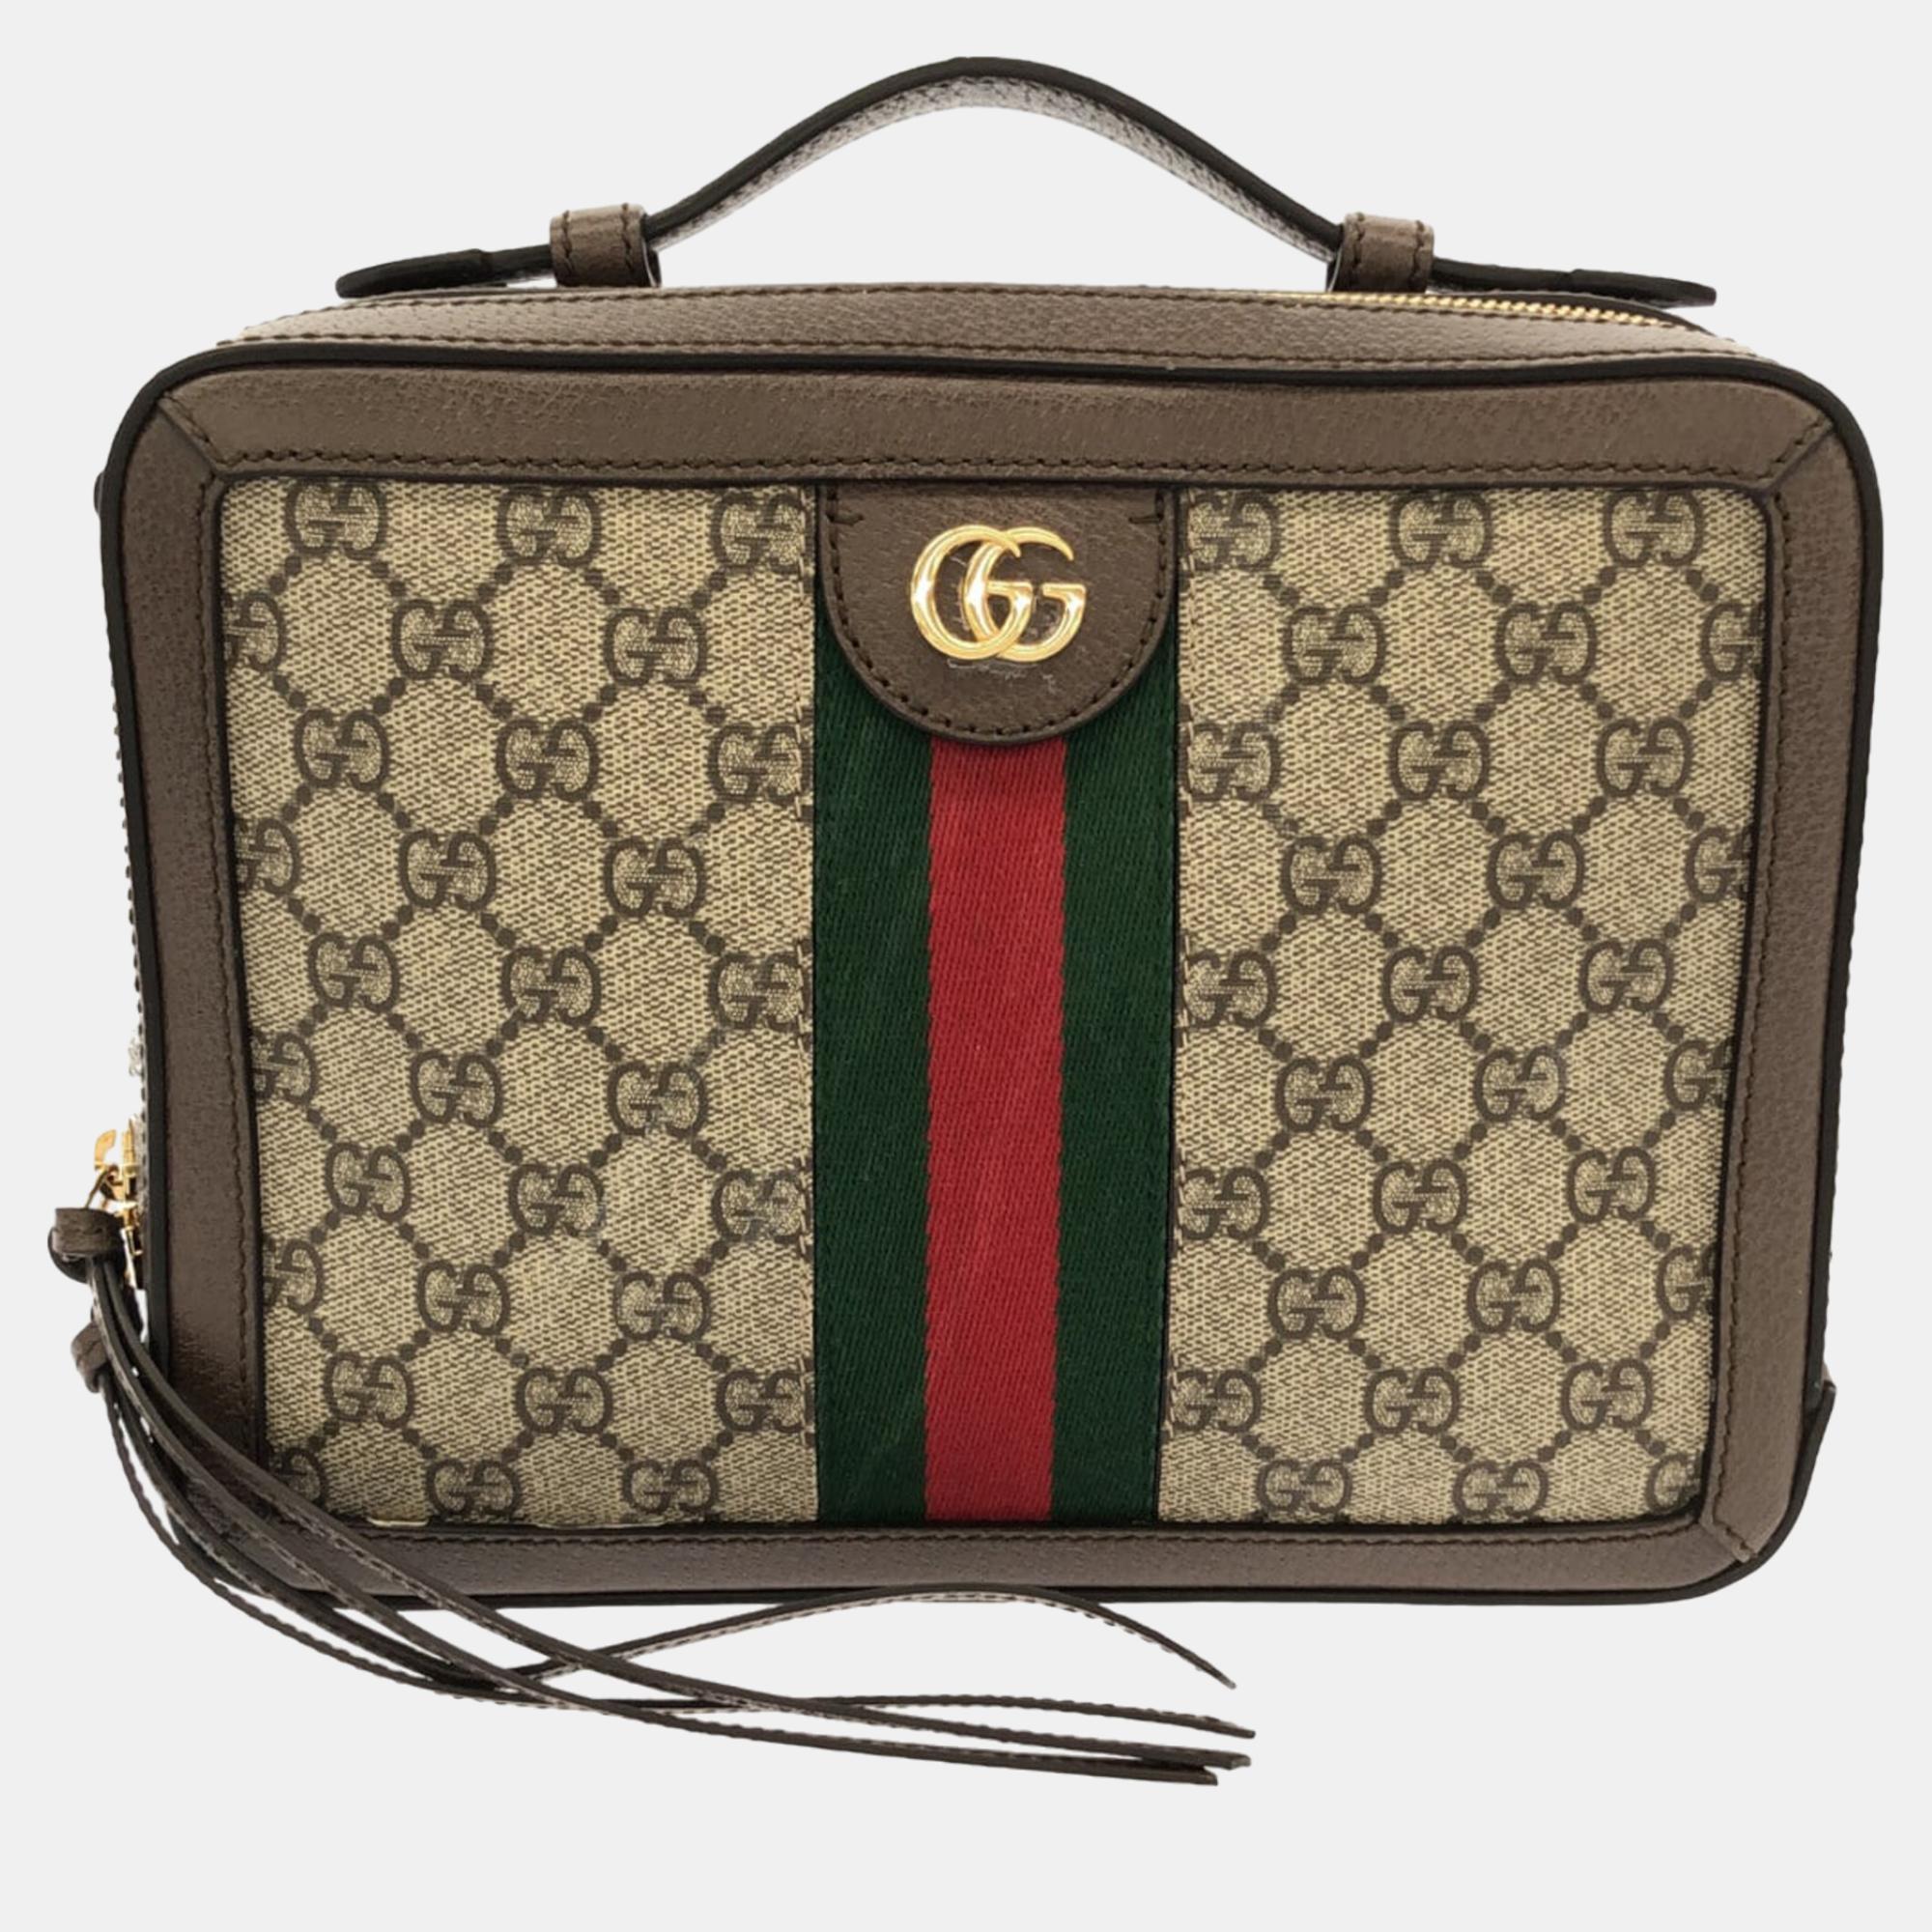 Gucci beige/brown small gg supreme ophidia satchel